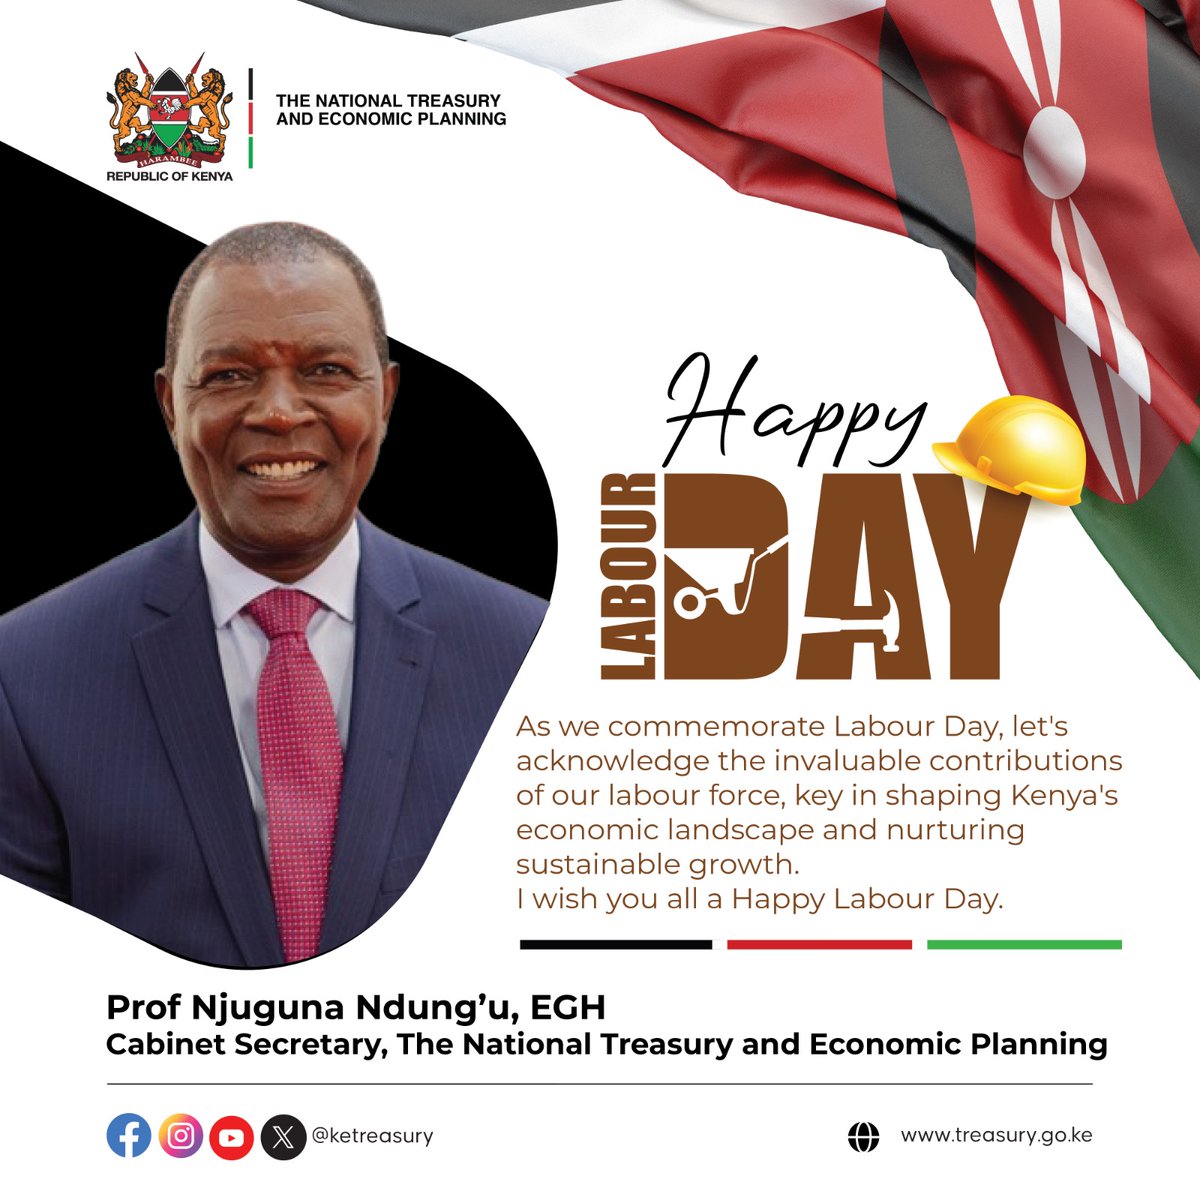 'As we commemorate Labour Day, let's acknowledge the invaluable contributions of our labour force, key in shaping Kenya's economic landscape & nurturing sustainable growth. I wish you all a HAPPY LABOUR DAY'~ Prof Njuguna Ndung’u EGH CS,the National Treasury,and Econ Planning